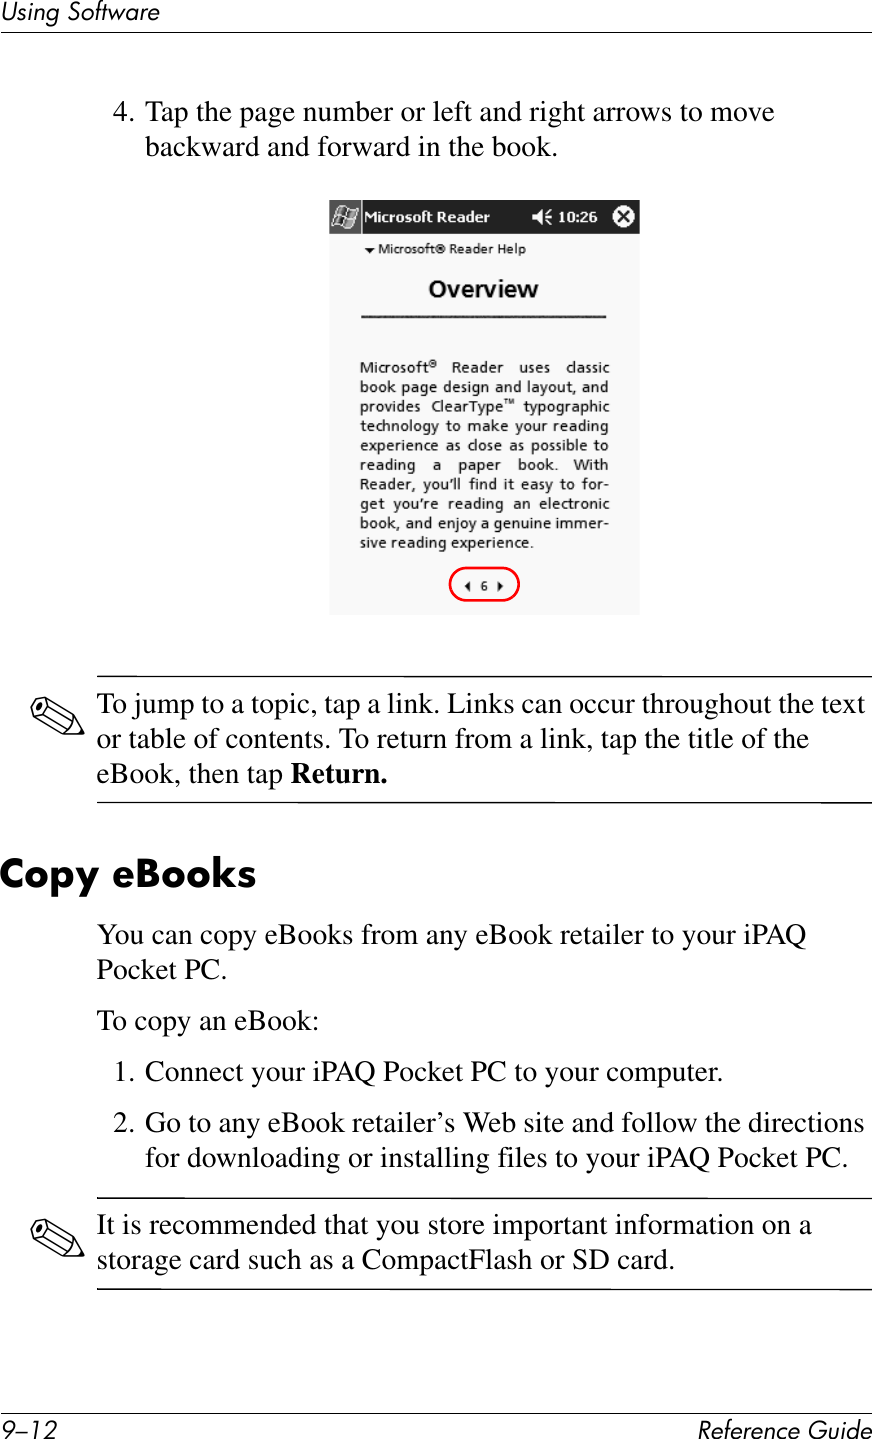 H/.0 !&quot;#&quot;$&quot;%&amp;&quot;&apos;()*+&quot;UL*%2&apos;37#1V4$&quot;4. Tap the page number or left and right arrows to move backward and forward in the book.✎To jump to a topic, tap a link. Links can occur throughout the text or table of contents. To return from a link, tap the title of the eBook, then tap Return.26FO&amp;&quot;C66T8You can copy eBooks from any eBook retailer to your iPAQ Pocket PC.To copy an eBook:1. Connect your iPAQ Pocket PC to your computer.2. Go to any eBook retailer’s Web site and follow the directions for downloading or installing files to your iPAQ Pocket PC.✎It is recommended that you store important information on a storage card such as a CompactFlash or SD card.